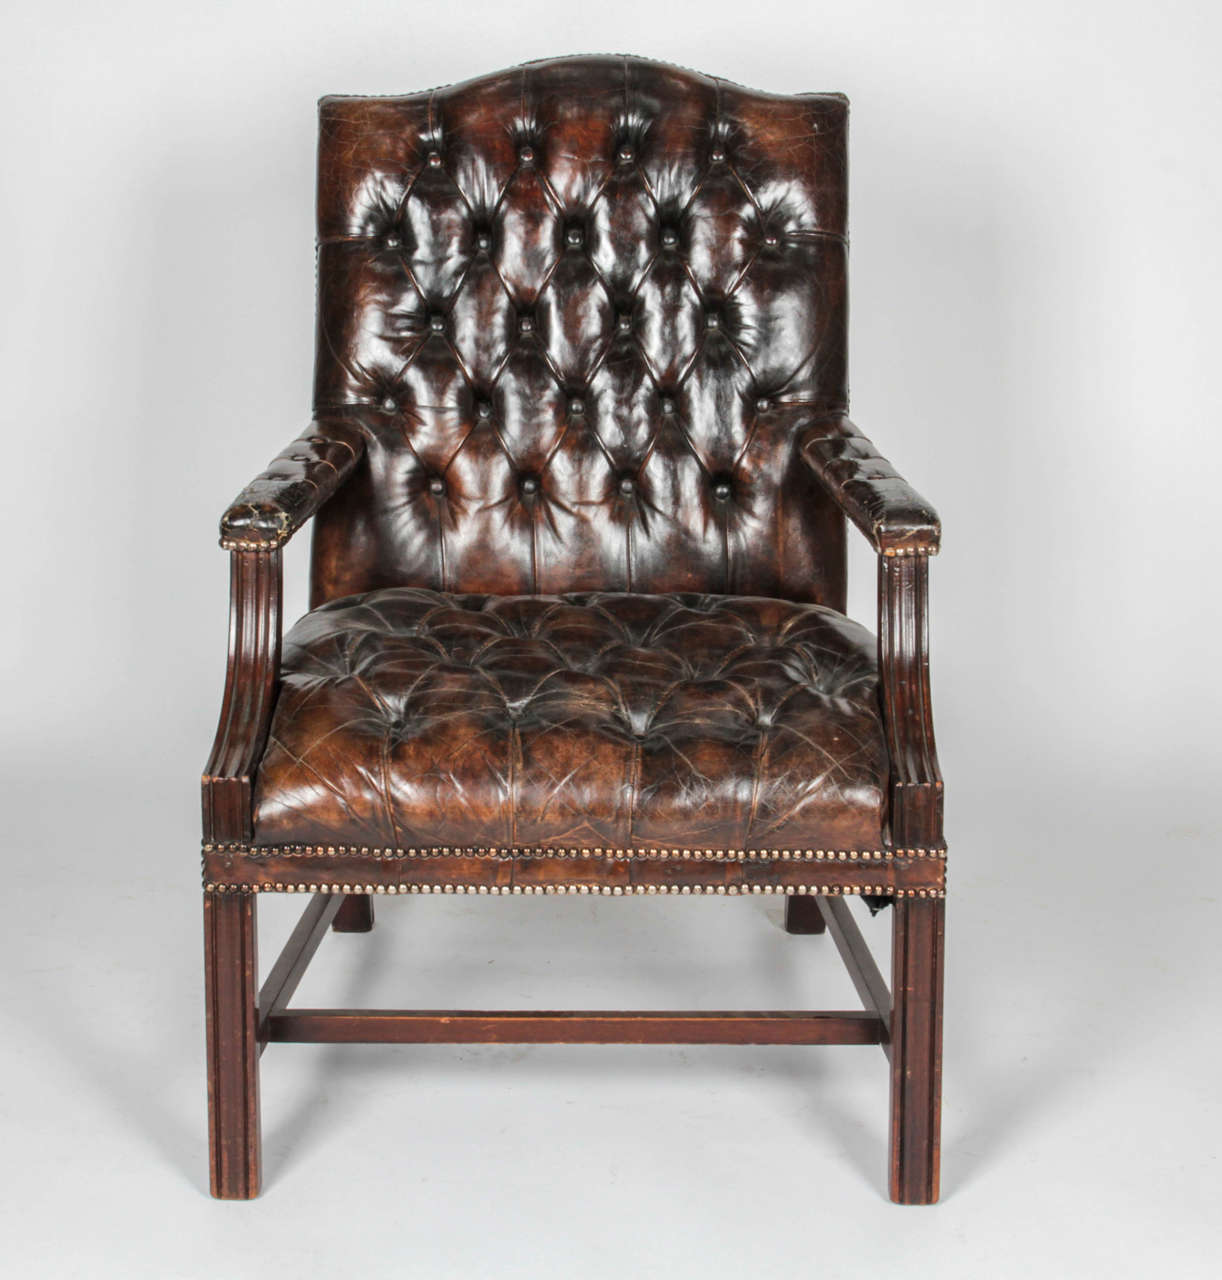 Pair of leather armchairs with wooden legs and stretcher. Done in the Chesterfield style. Brown leather appears to be original and more worn along the seat front with cracking on the arms (see pictures). nailhead detailing along edges.

Not